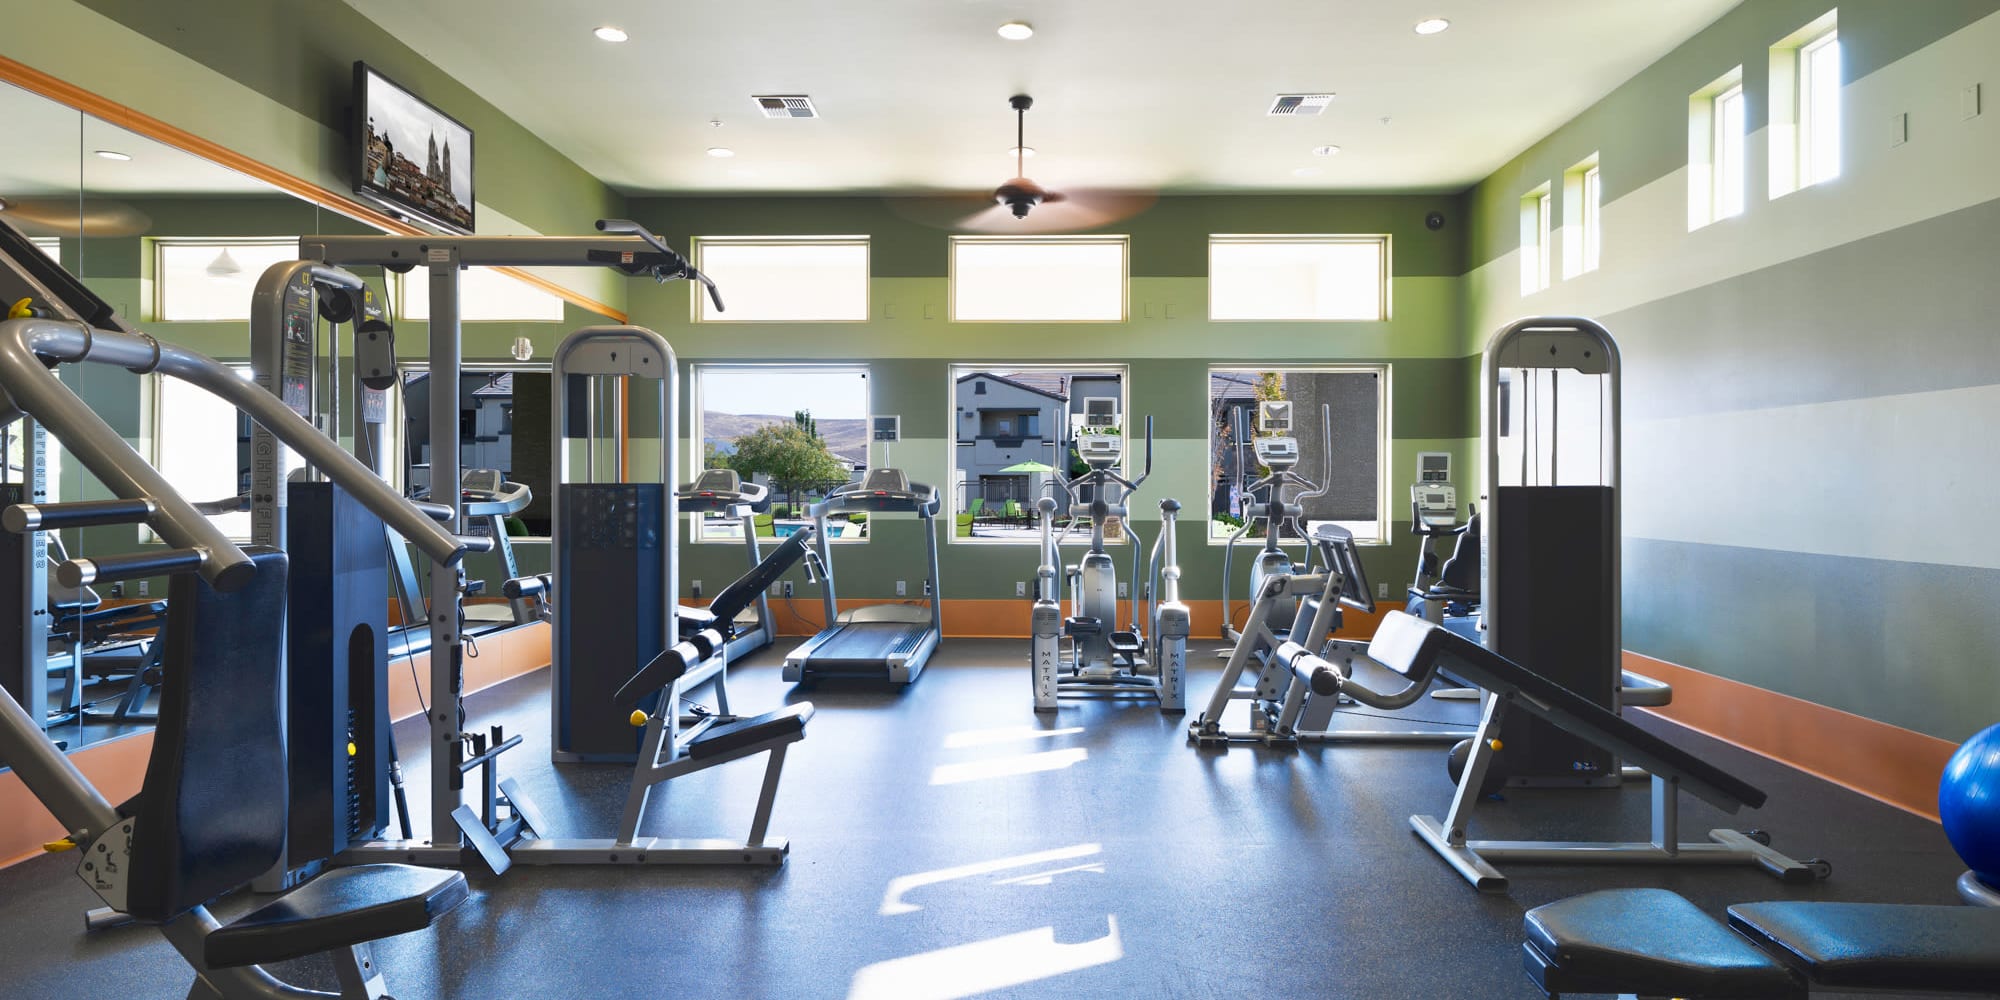 Fitness center at The Trails at Pioneer Meadows in Sparks, Nevada